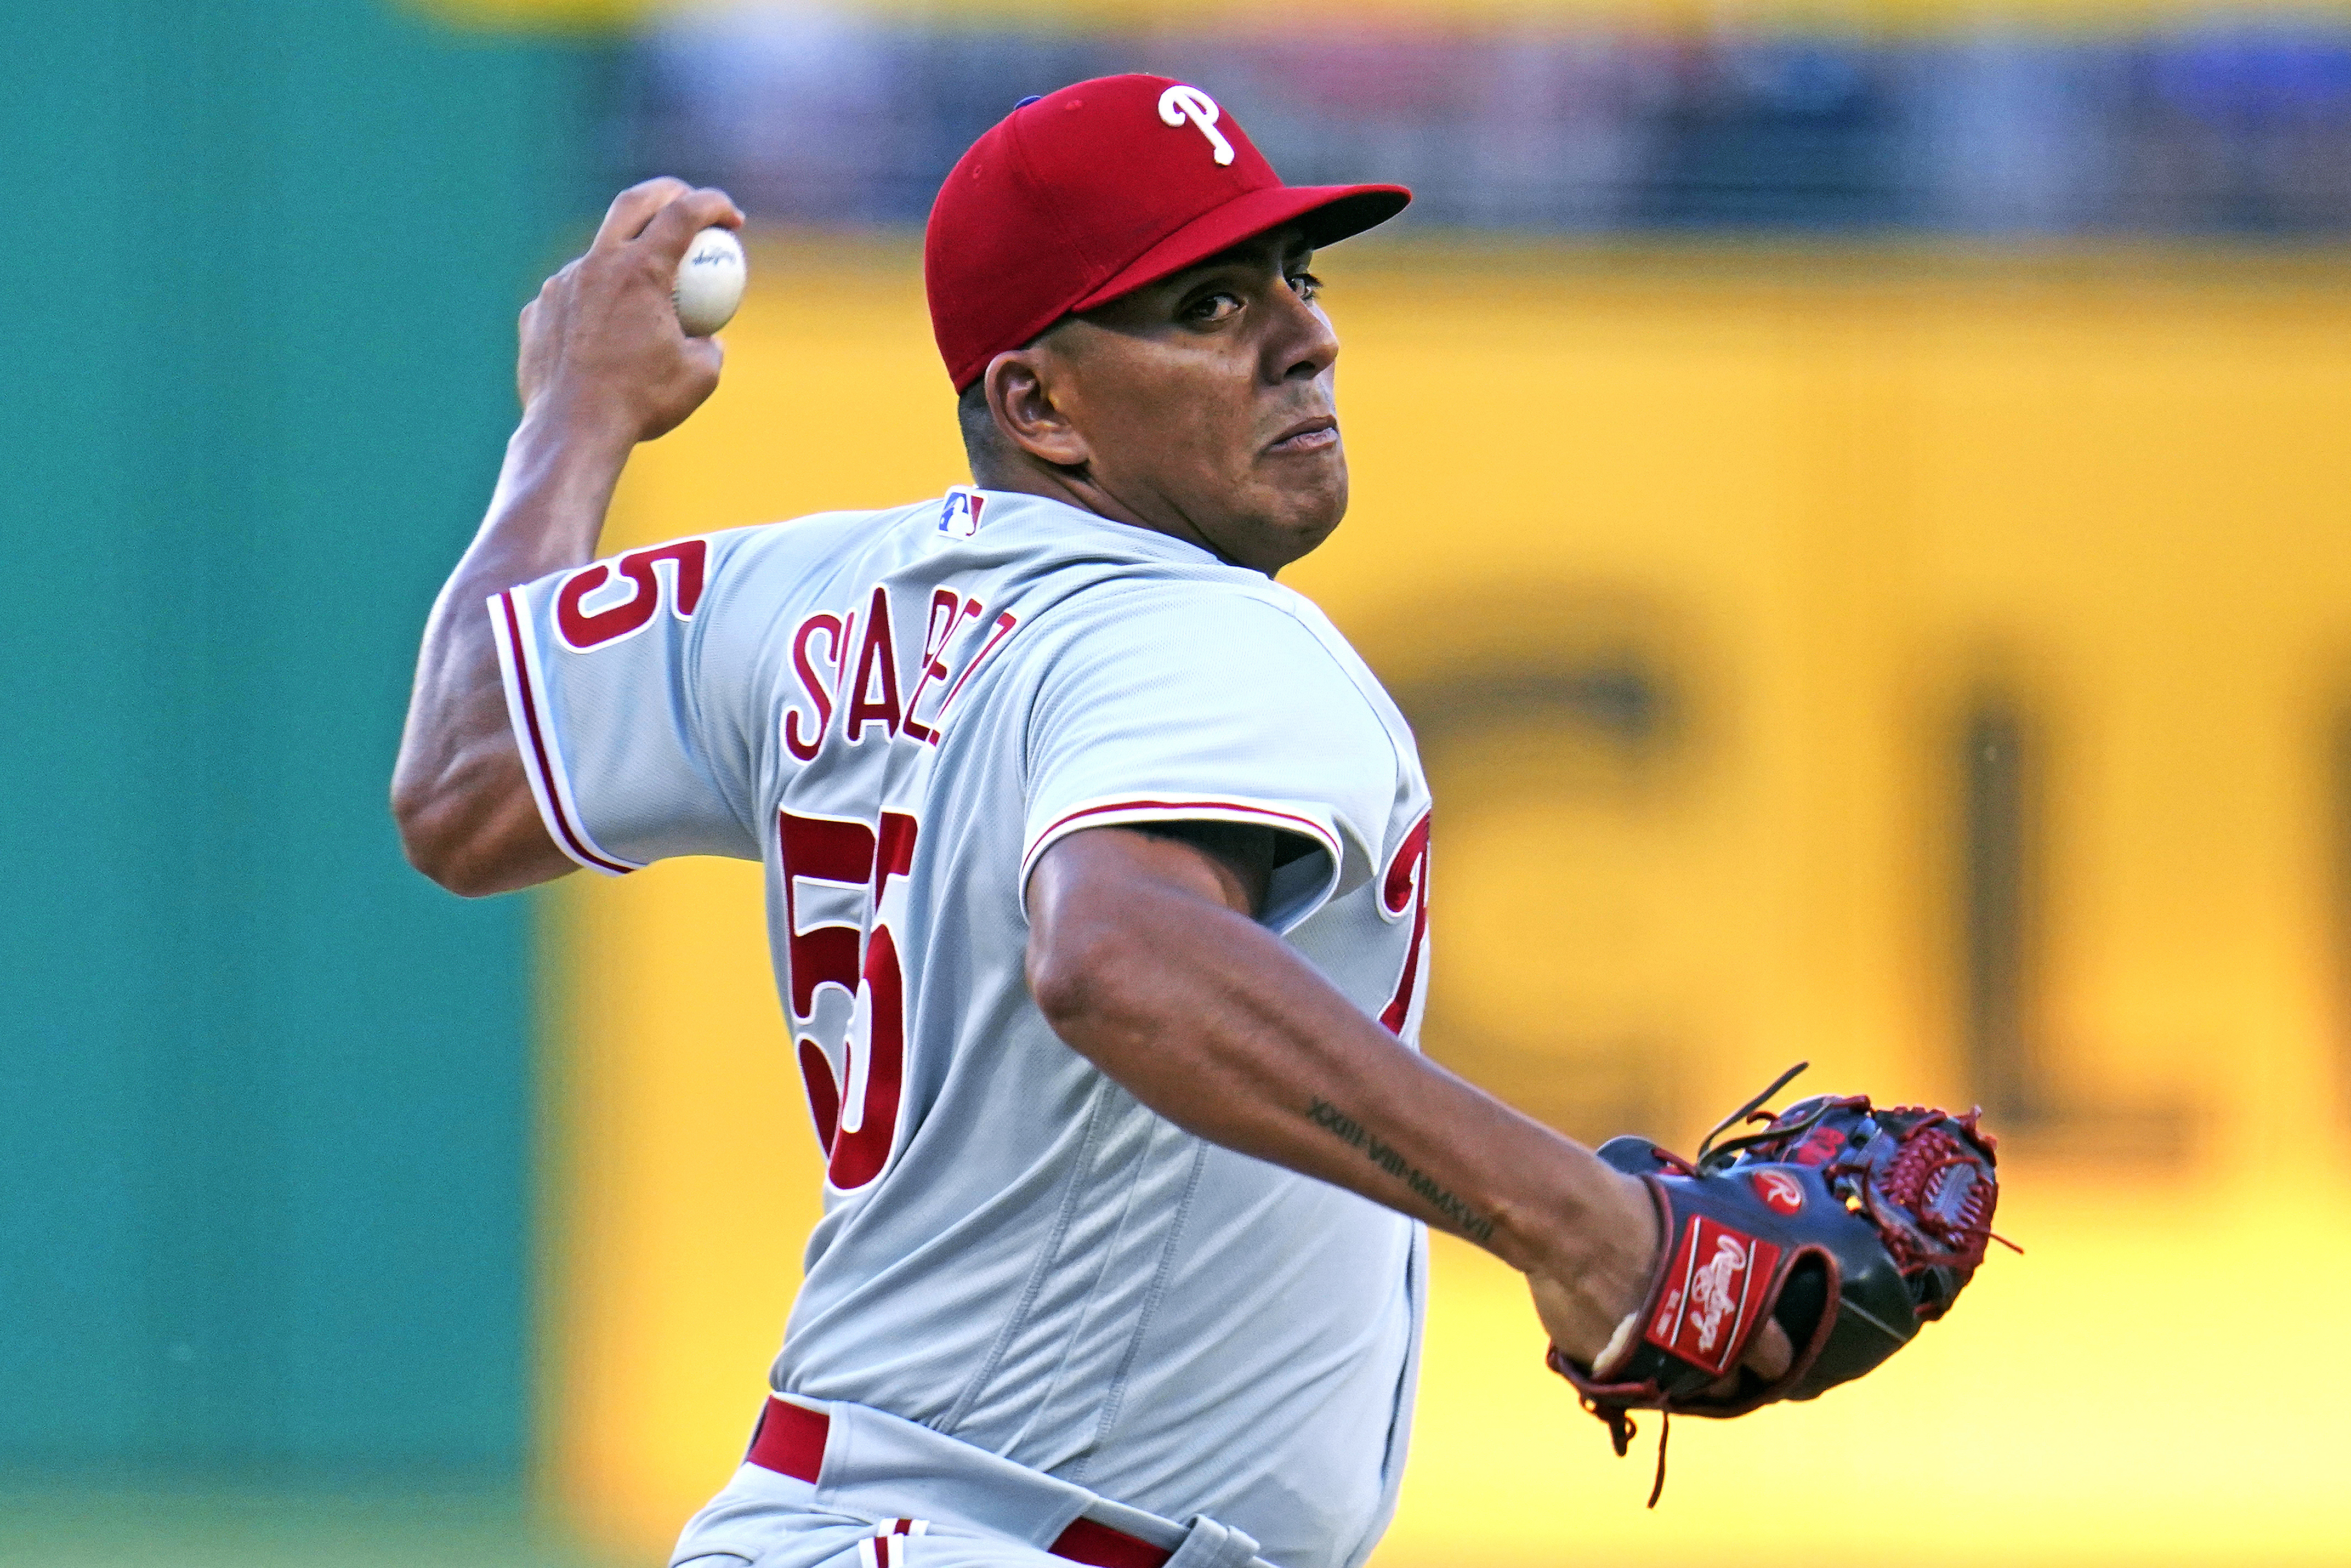 Ranger Suárez returns with five shutout innings as Phillies rout Marlins